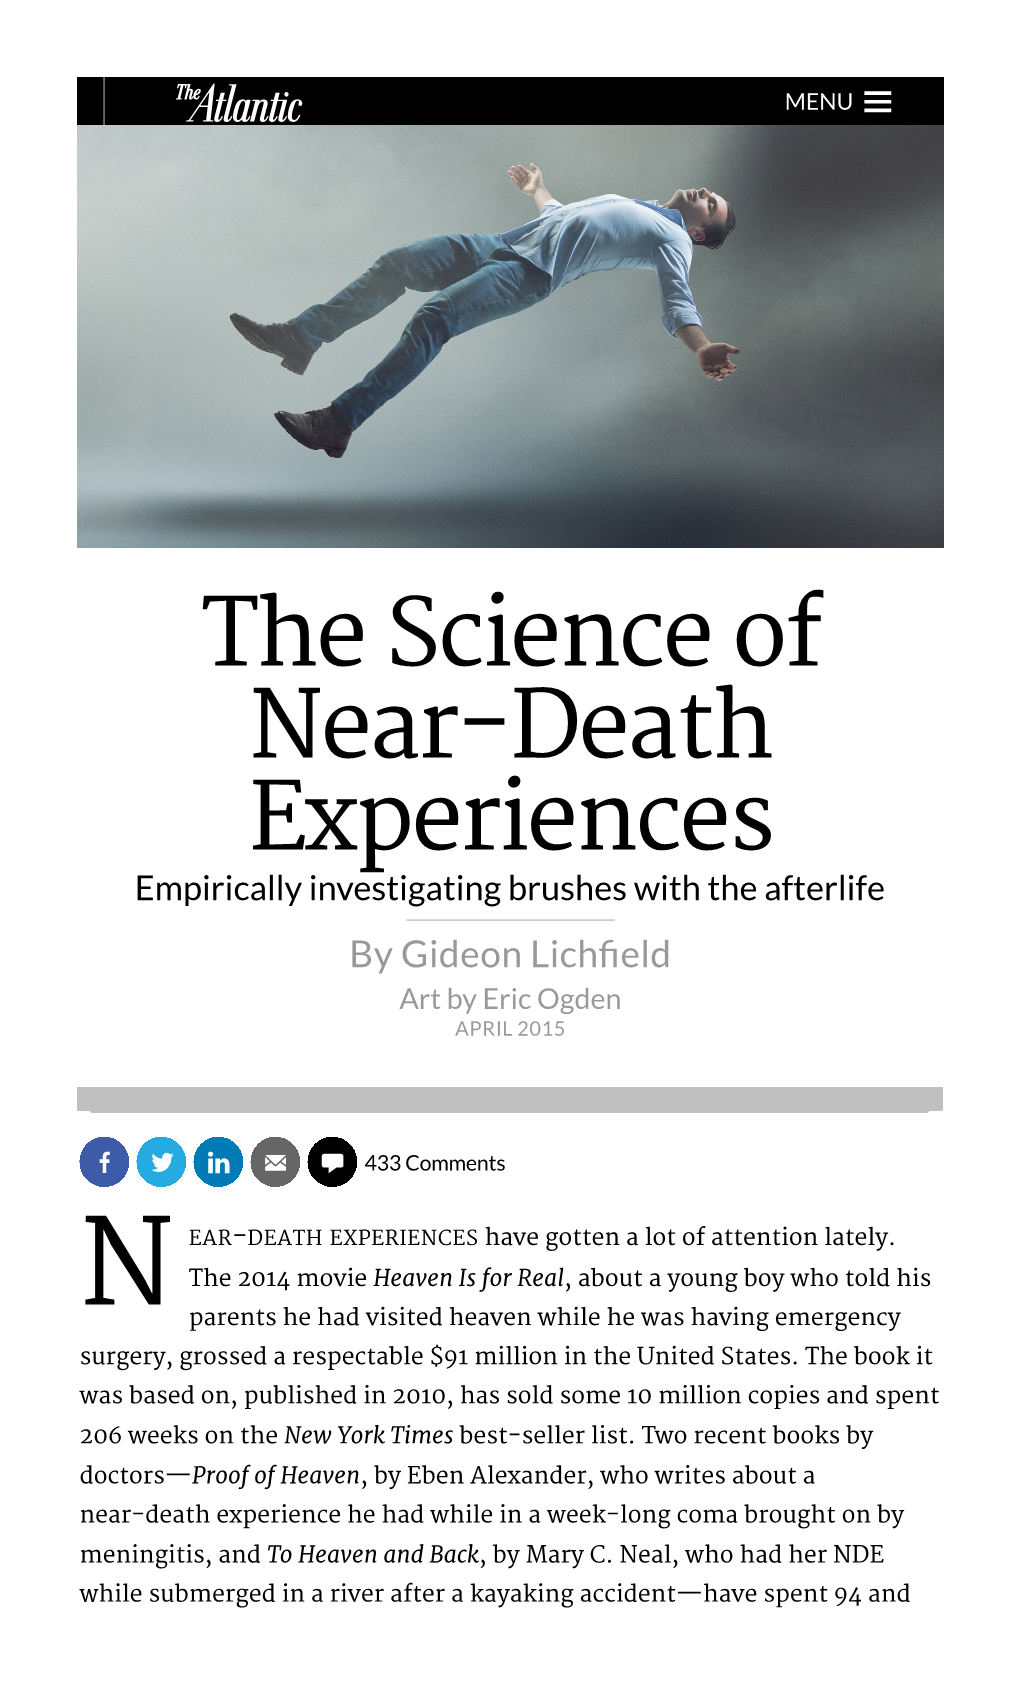 The Science of Near-Death Experiences Empirically Investigating Brushes with the Afterlife by Gideon Lichﬁeld Art by Eric Ogden APRIL 2015